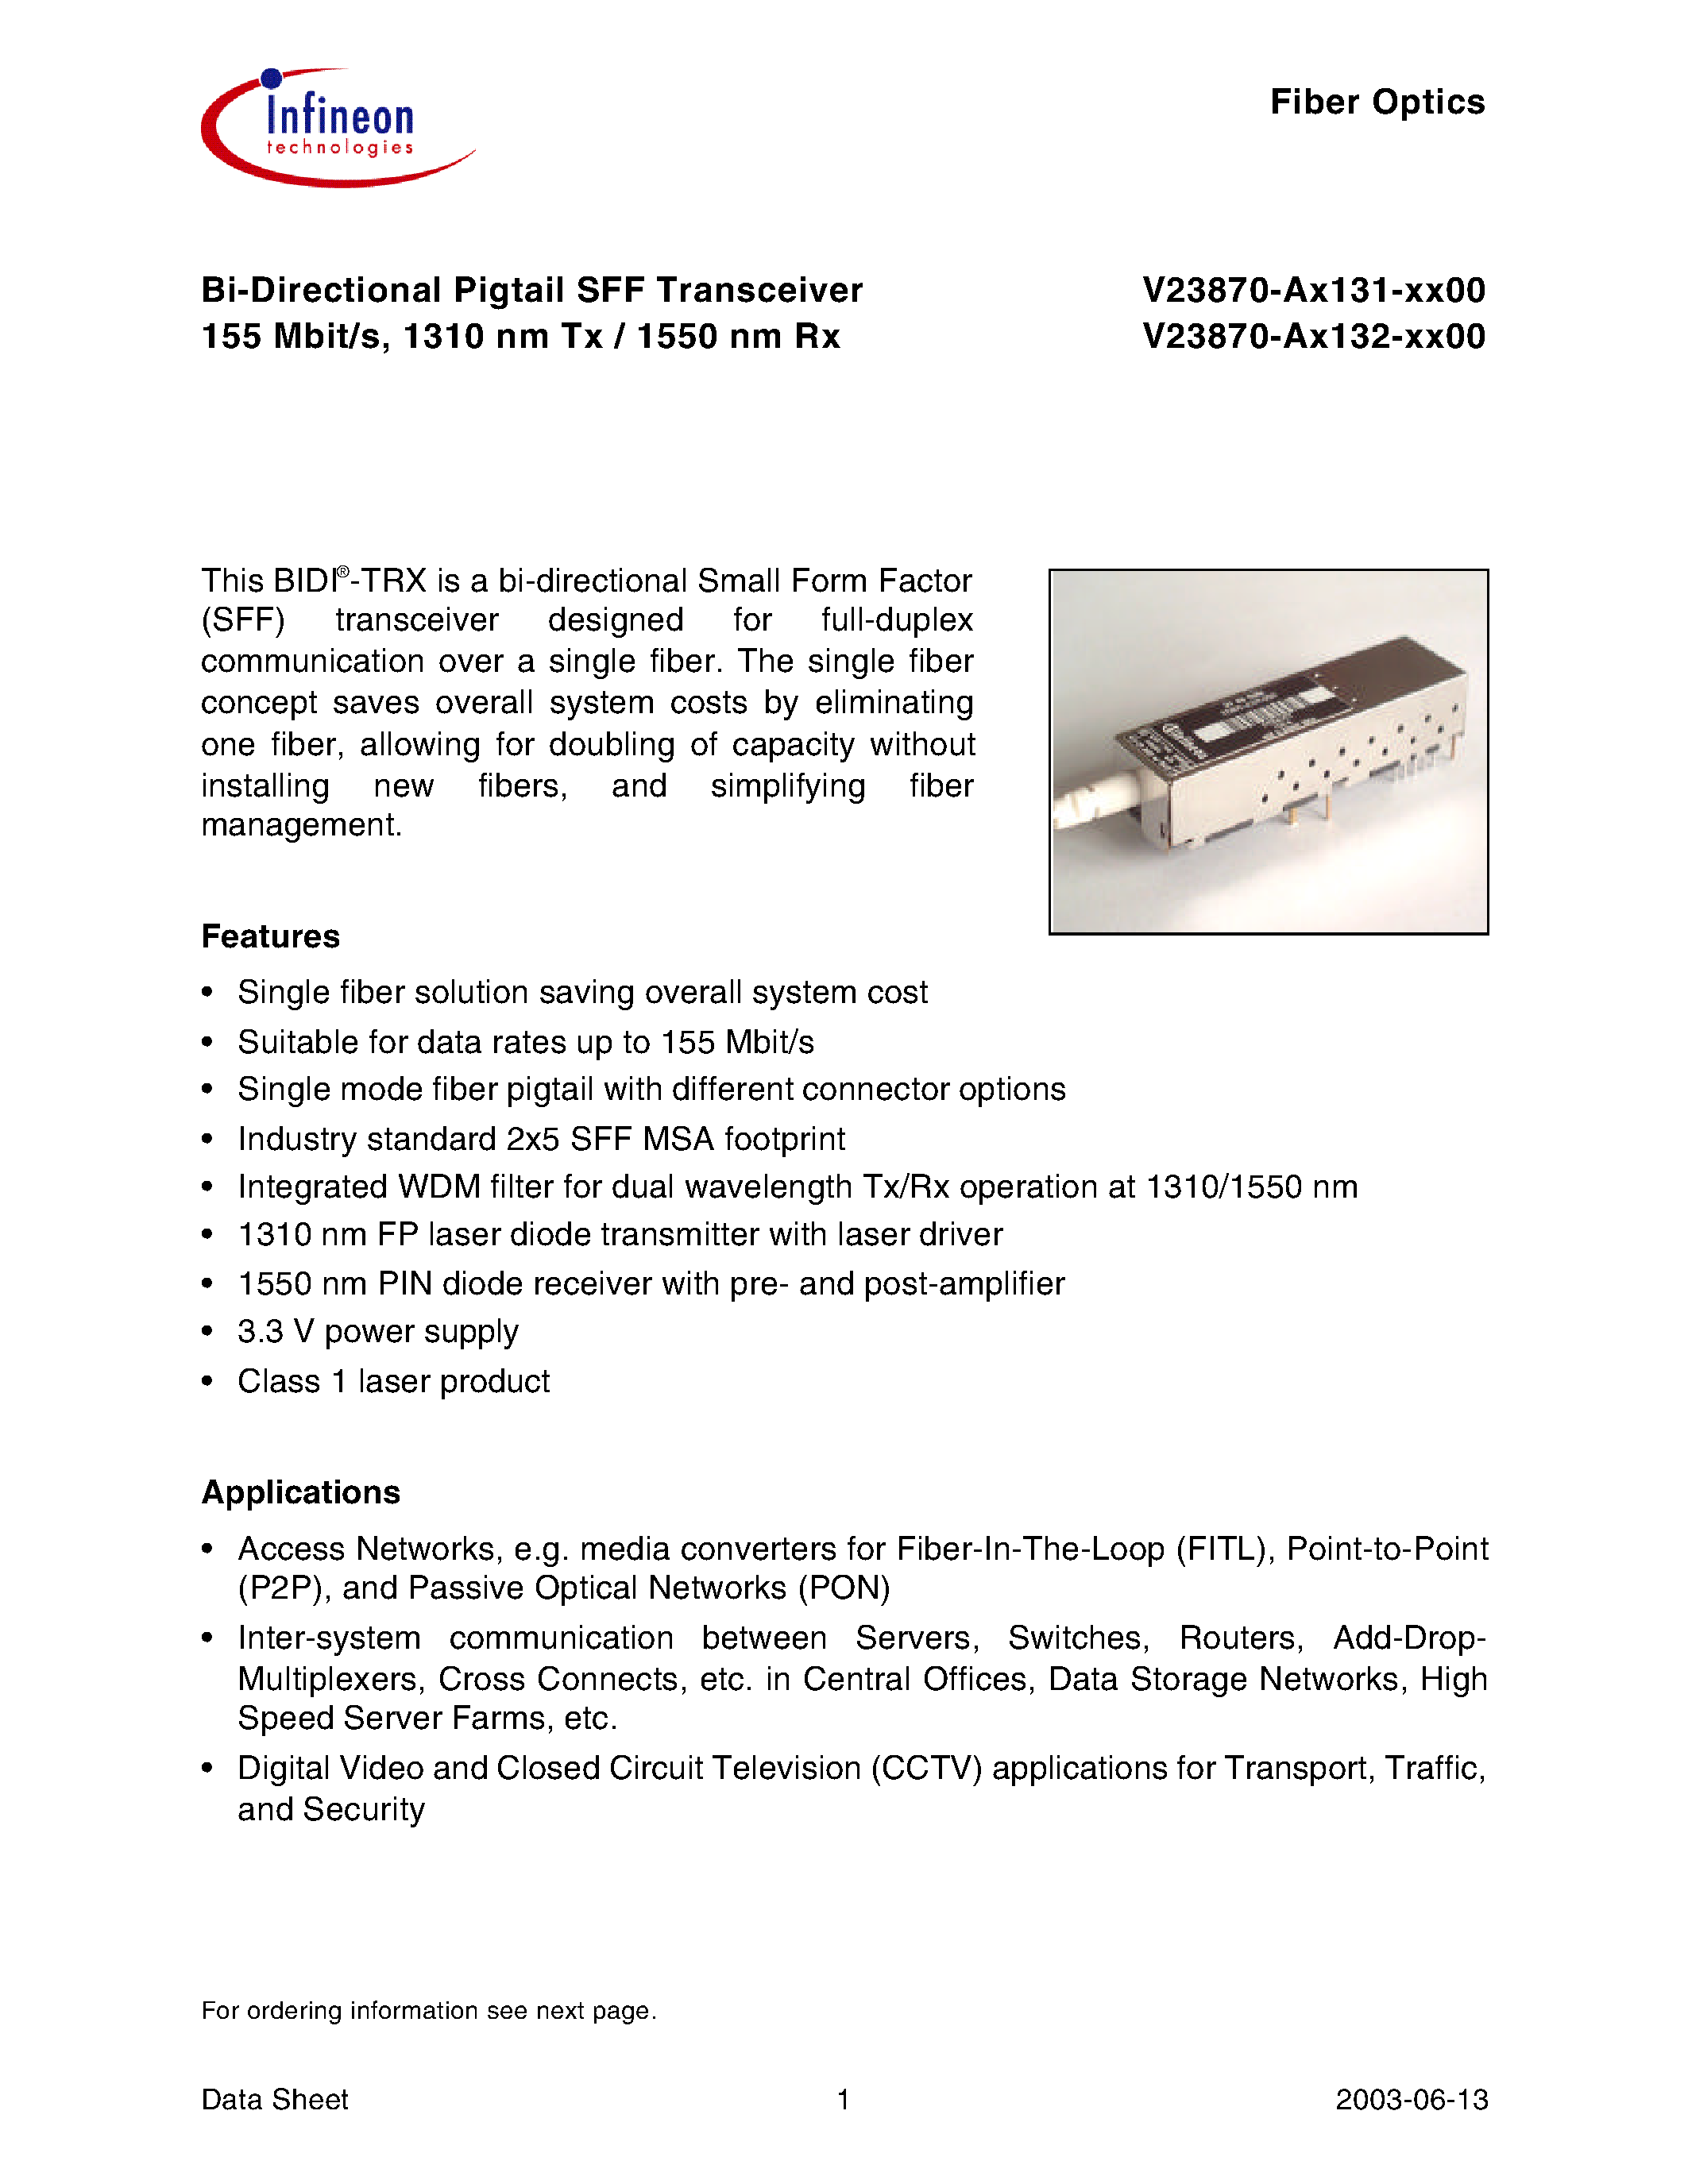 Datasheet V23870-A1132-H200 - Bi-Directional Pigtail SFF Transceiver 155 Mbit/s/ 1310 nm Tx / 1550 nm Rx page 1